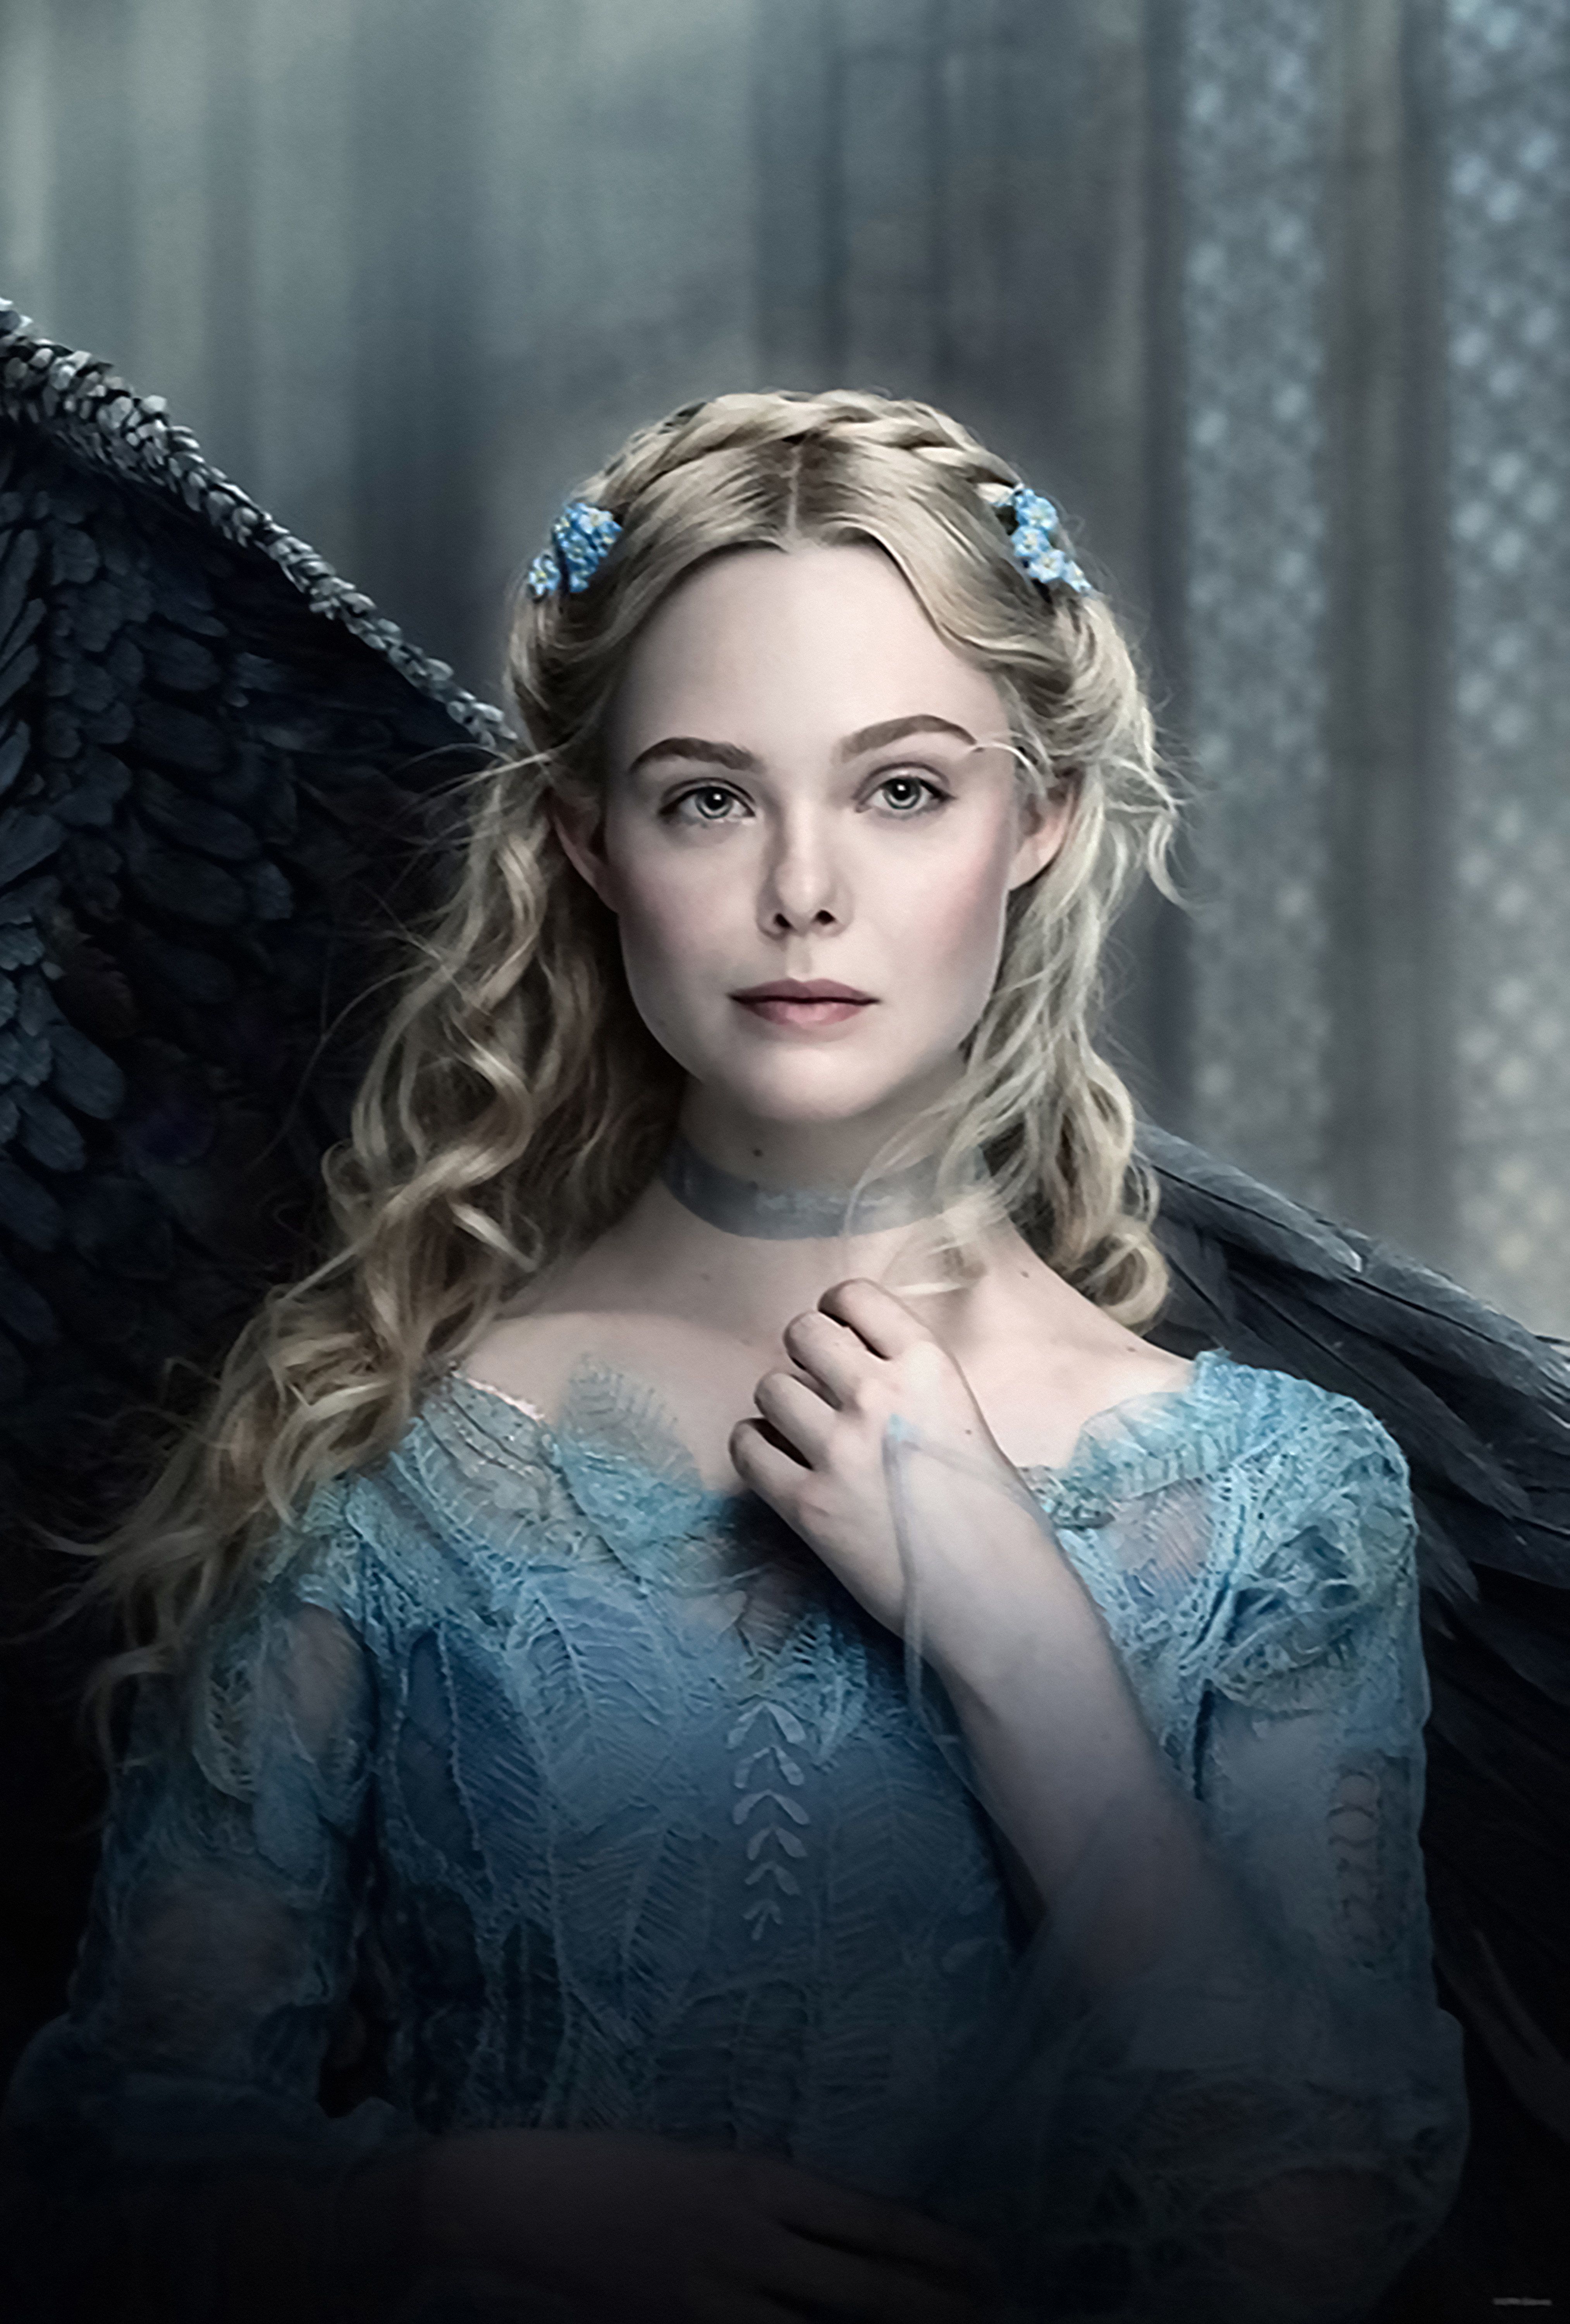 Elle Fanning in Maleficent 2 as Princess Aurora iPhone